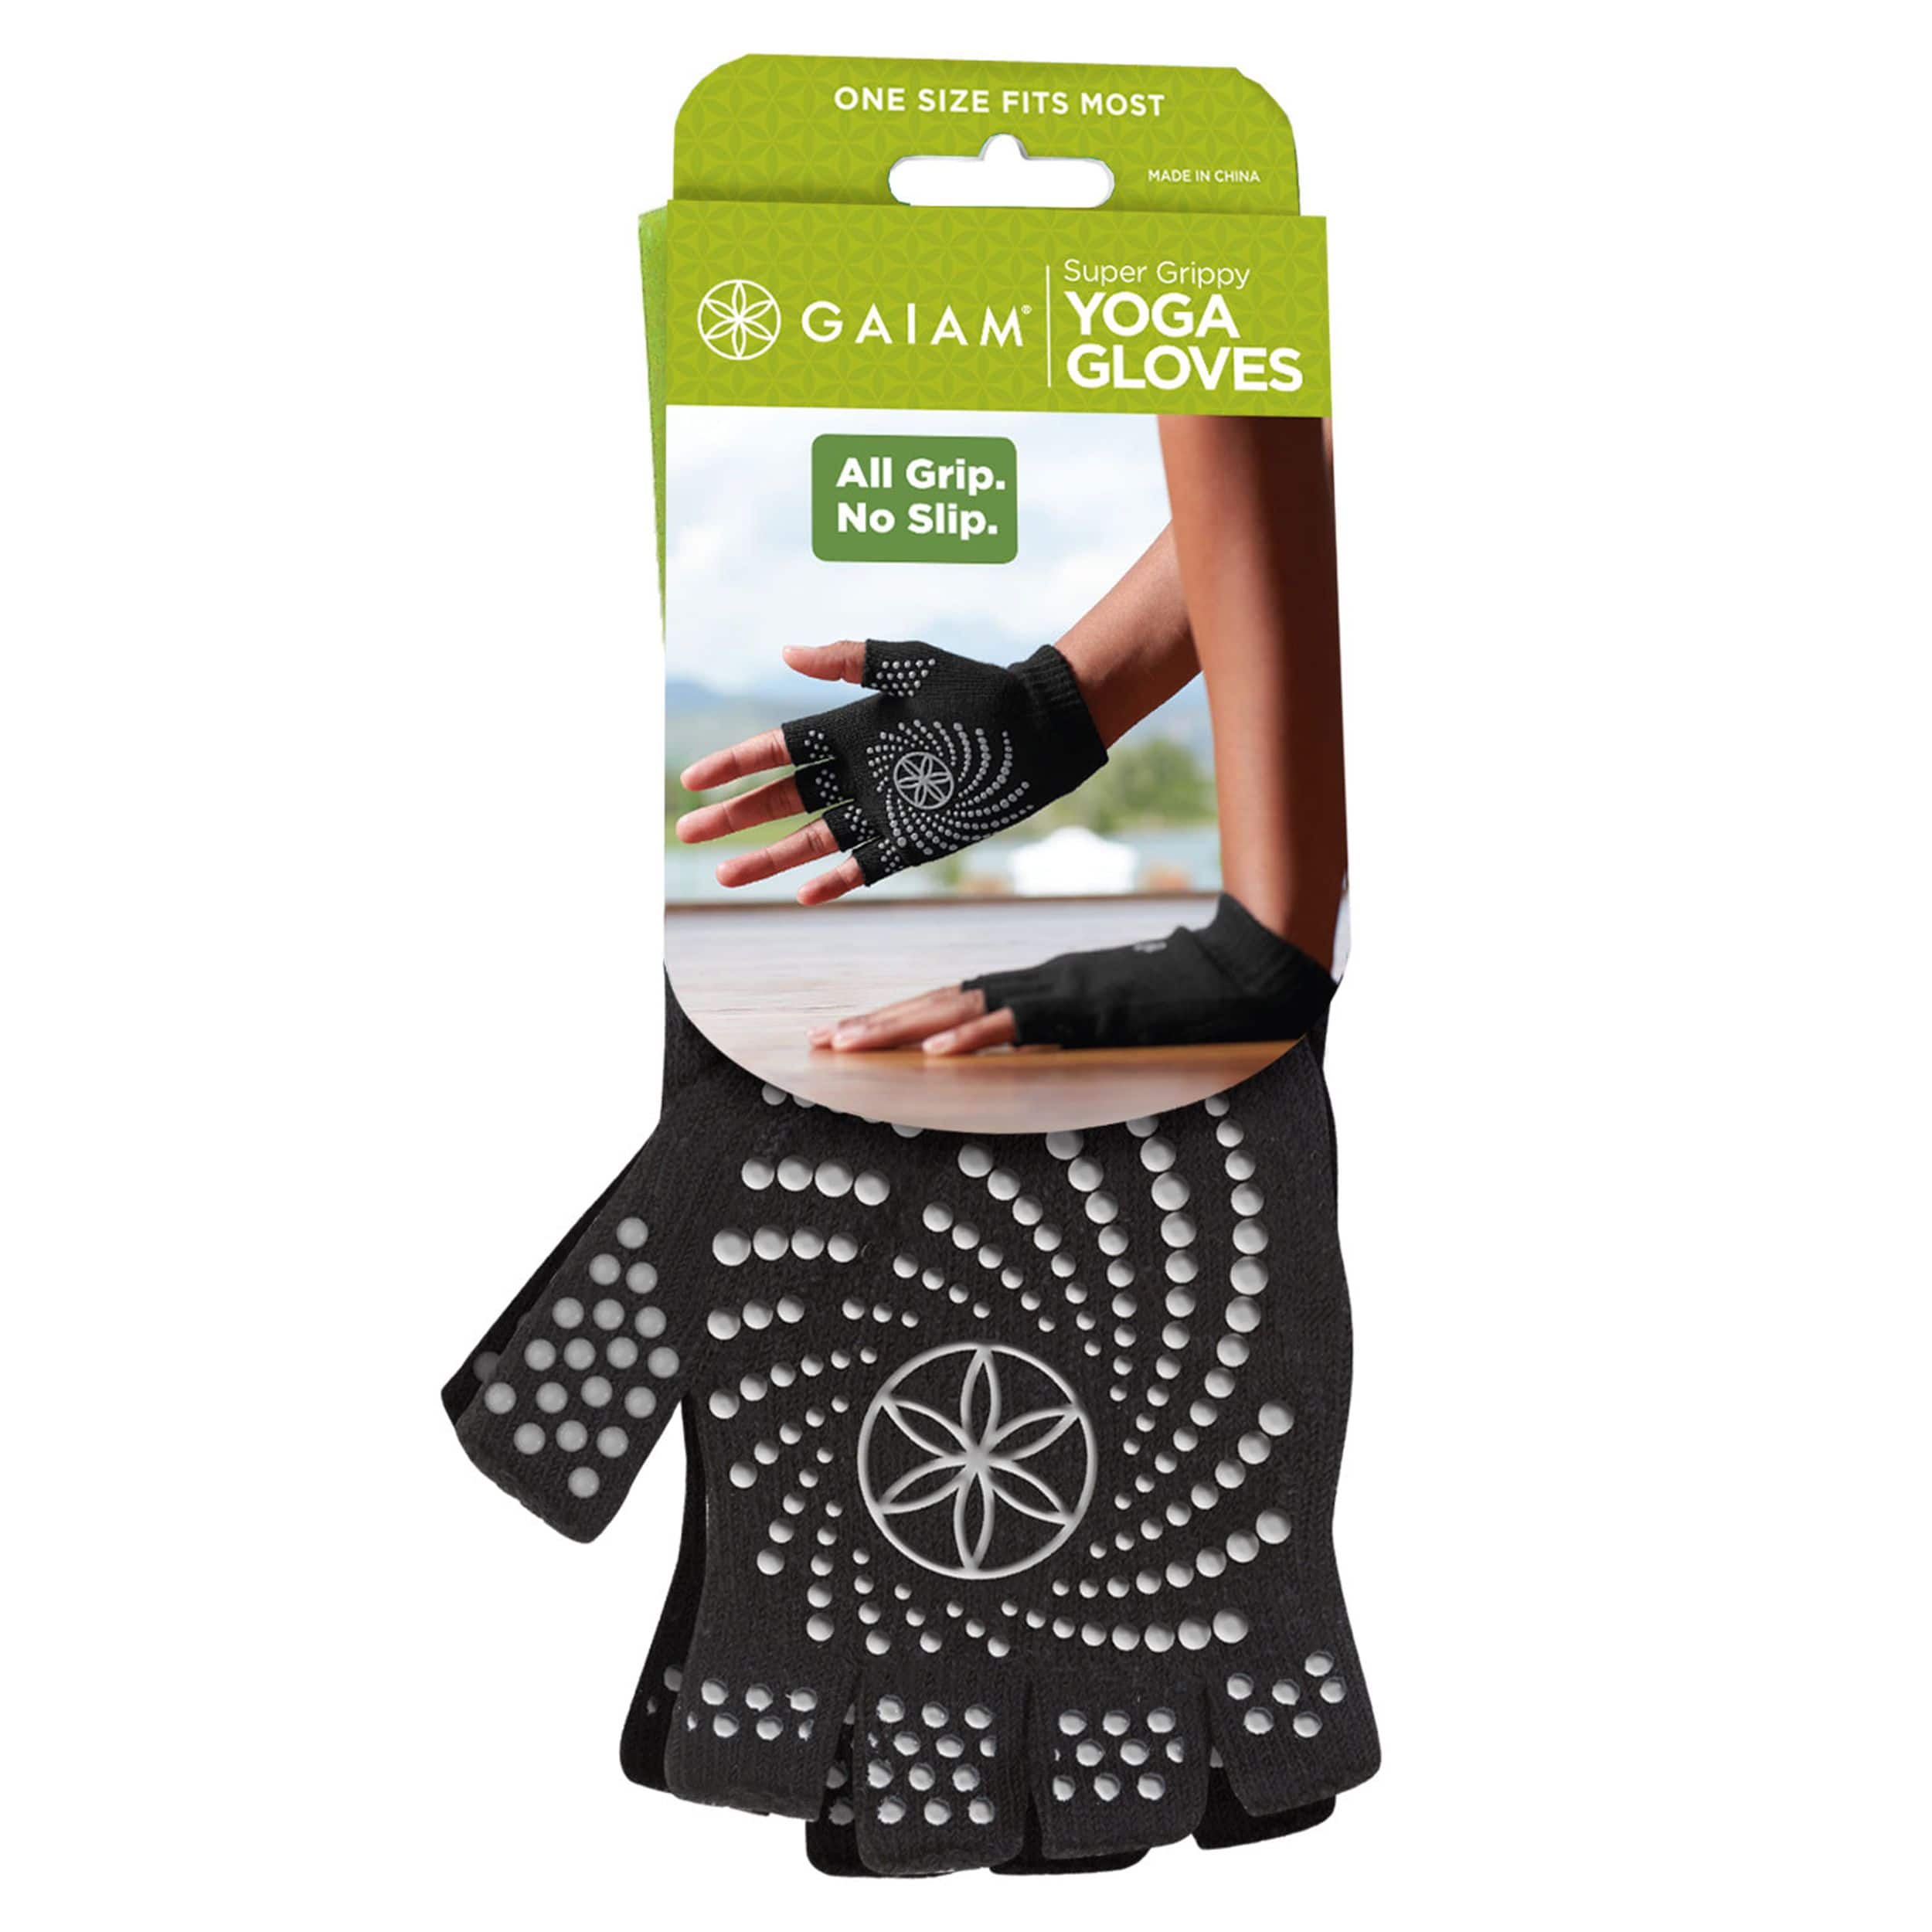 https://media-www.canadiantire.ca/product/playing/exercise/exercise-accessories/0847705/gaiam-super-grippy-yoga-gloves-22b79325-23db-45c6-a291-d159f6fb93af-jpgrendition.jpg